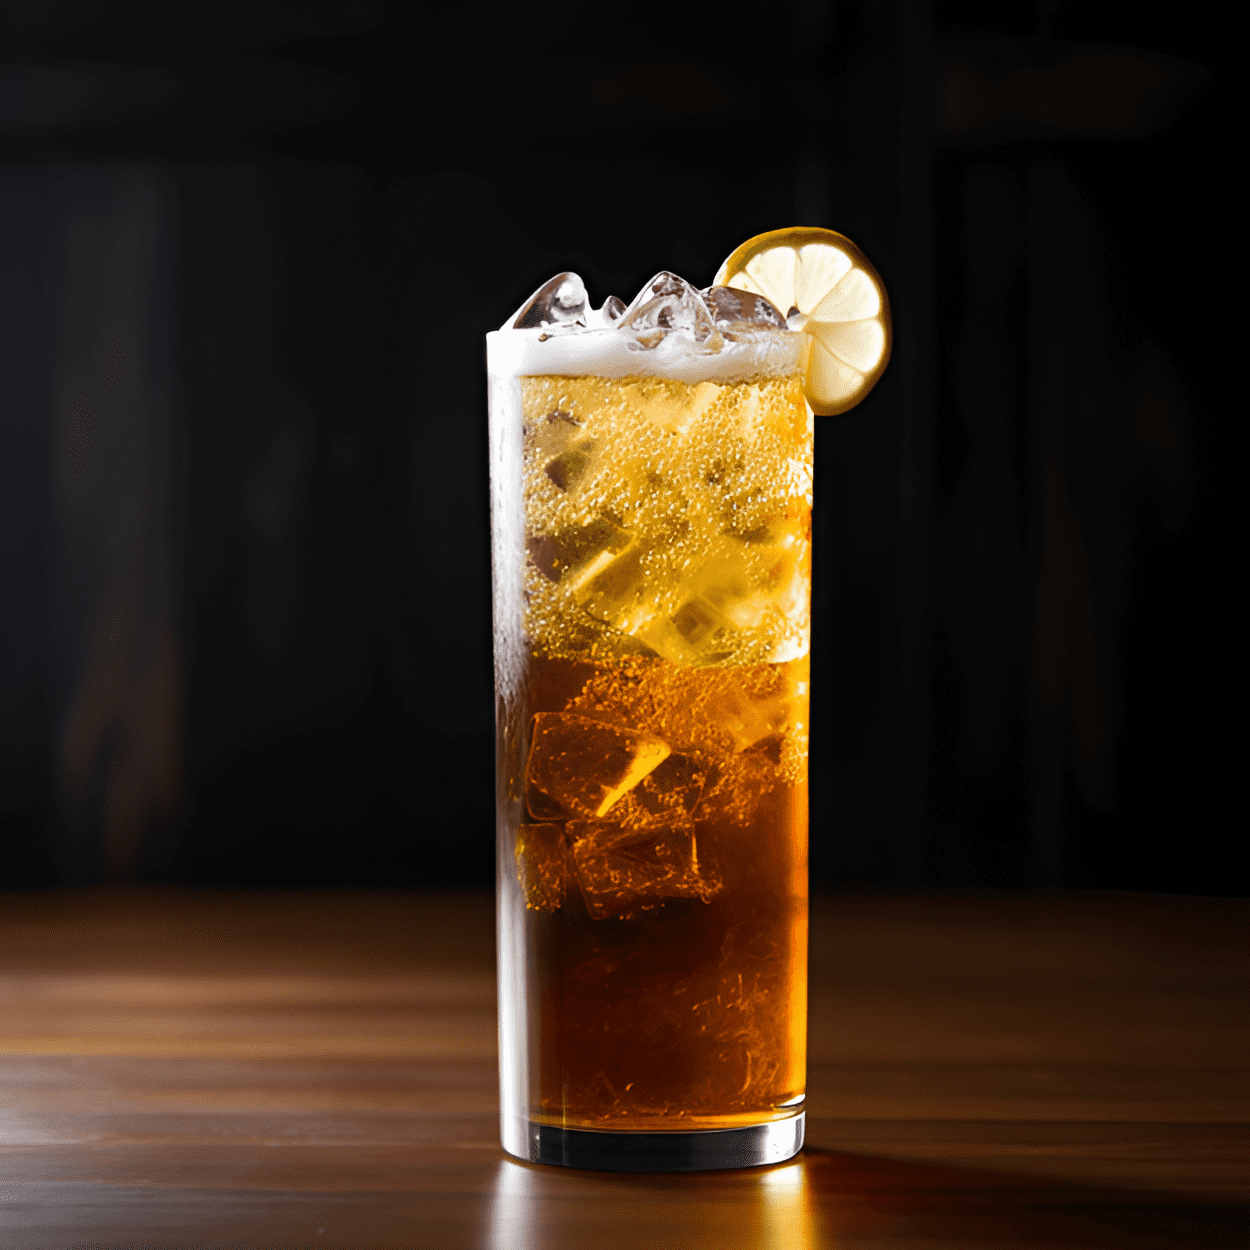 The Hanks Highball Cocktail Recipe - The Hanks Highball has a refreshing, well-balanced taste. The sweetness of the honey syrup and the tartness of the lemon juice blend perfectly with the robust flavor of the bourbon. The ginger beer adds a spicy kick, while the bitters provide a subtle hint of complexity.